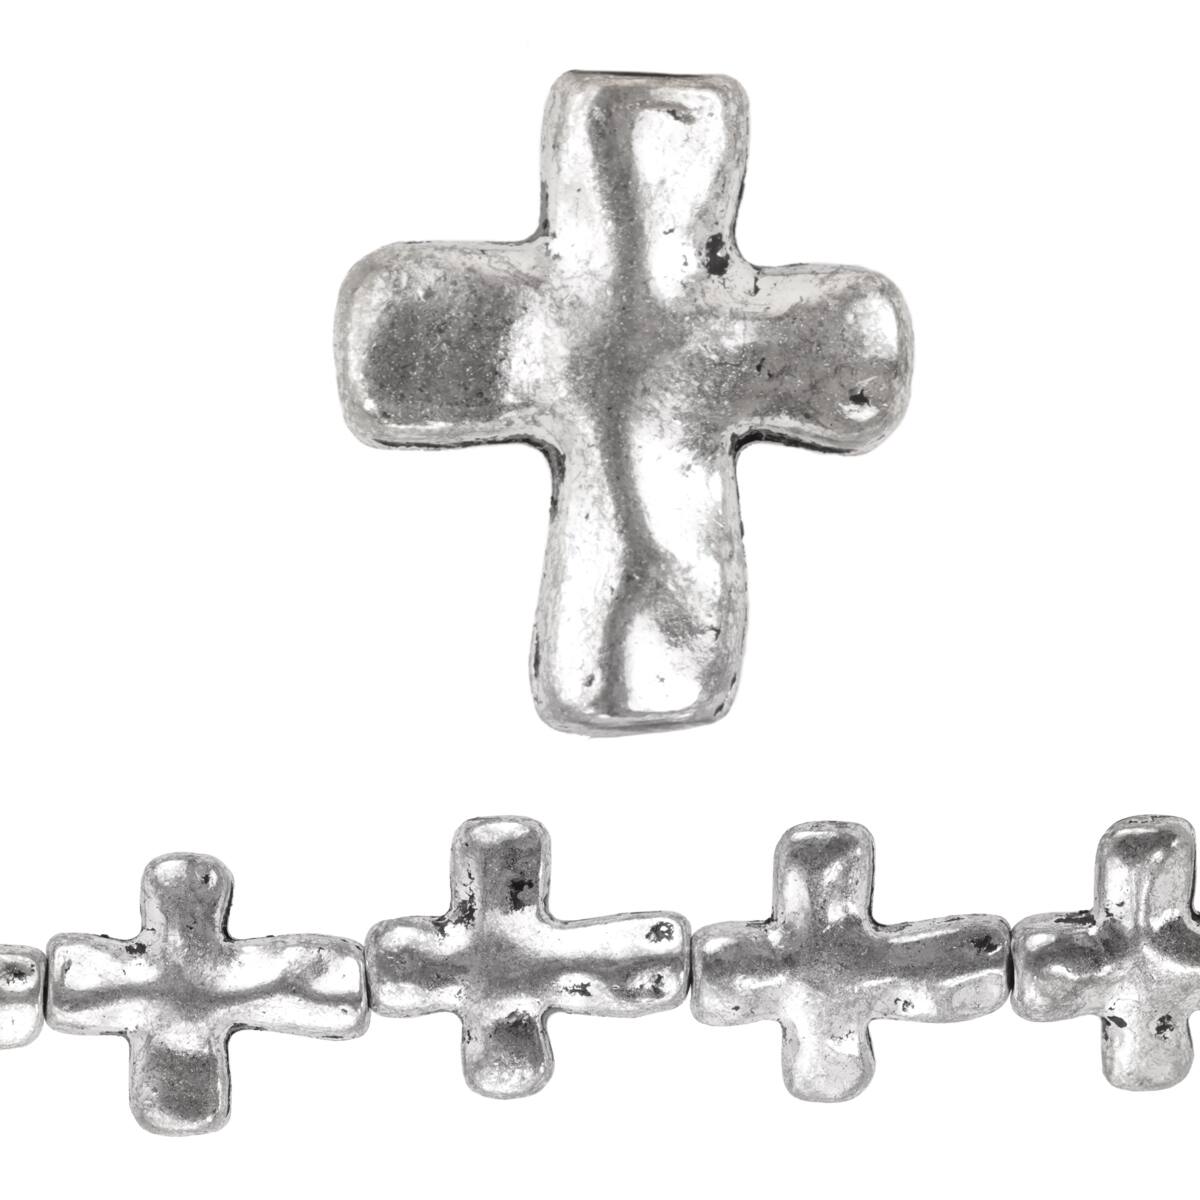 Crystal Cross metal hardware sell in pack of 6 pieces 